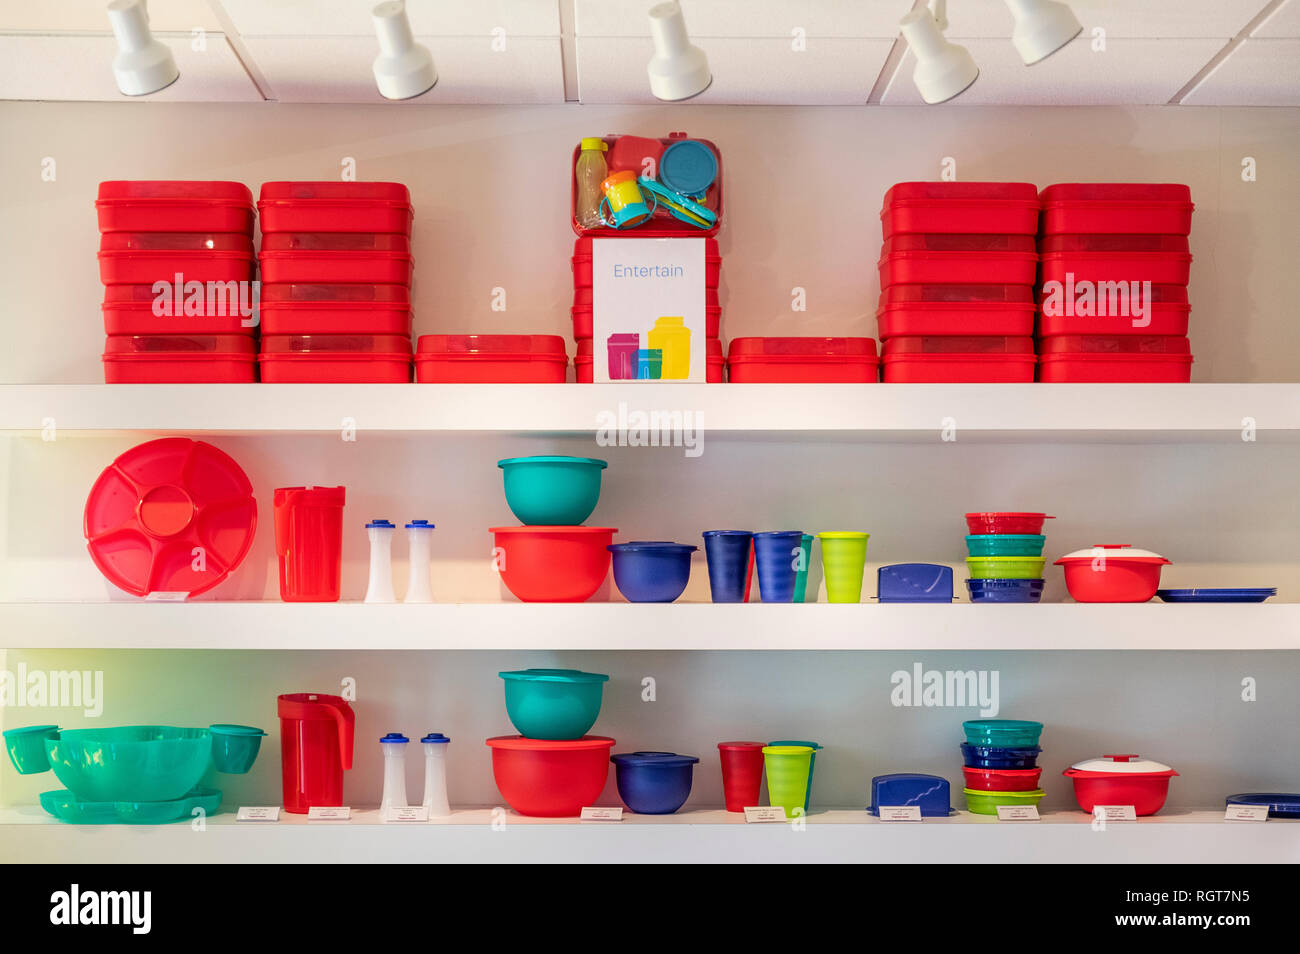 724 Tupperware Brand Stock Photos, High-Res Pictures, and Images - Getty  Images